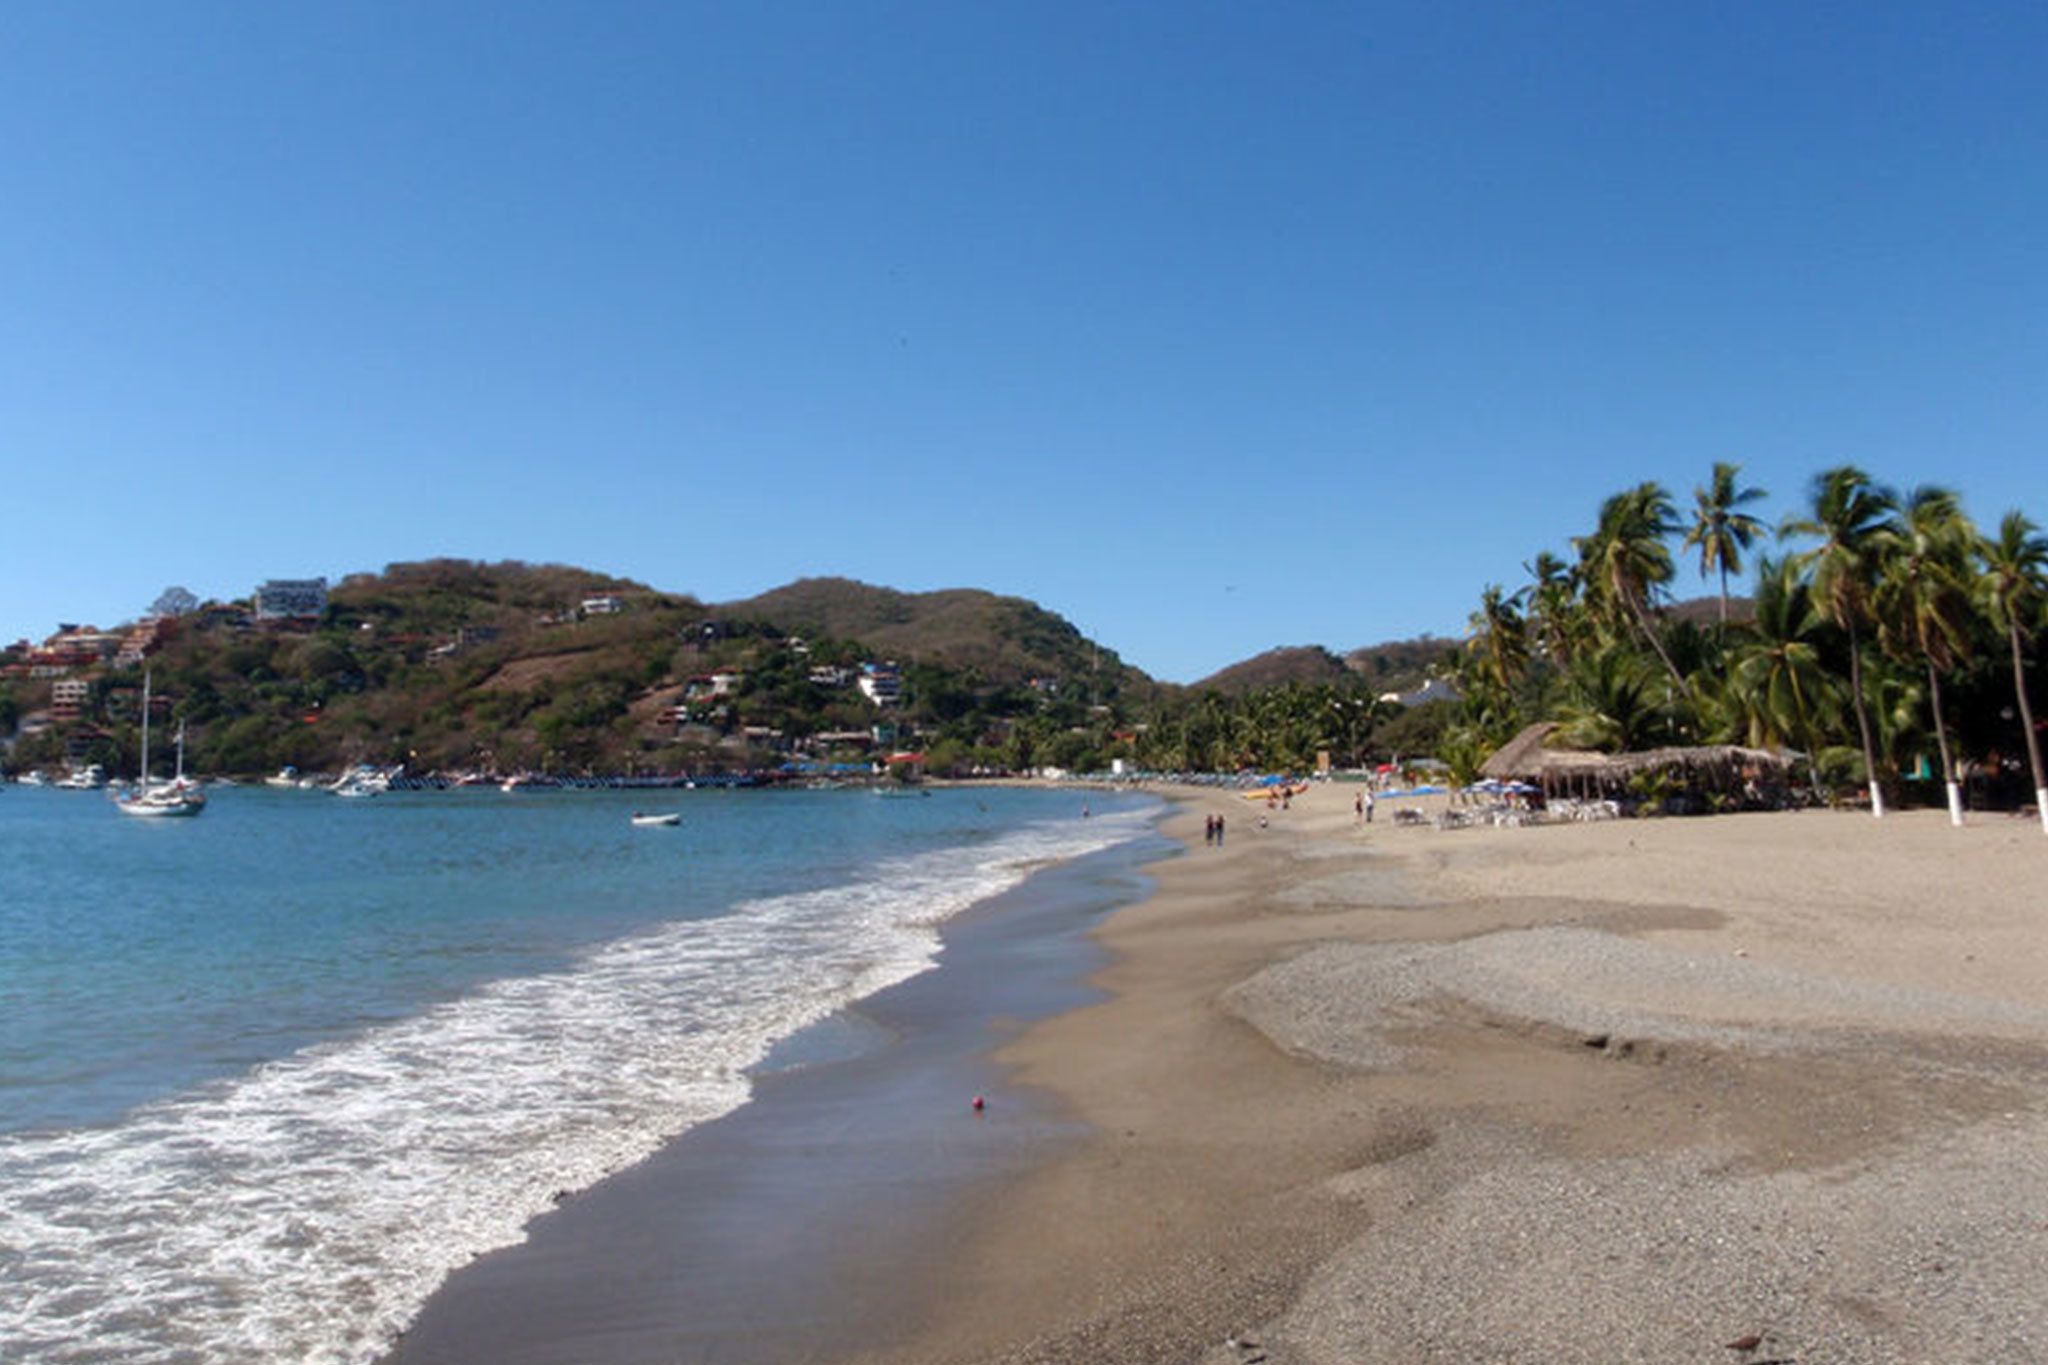 costco vacation packages ixtapa